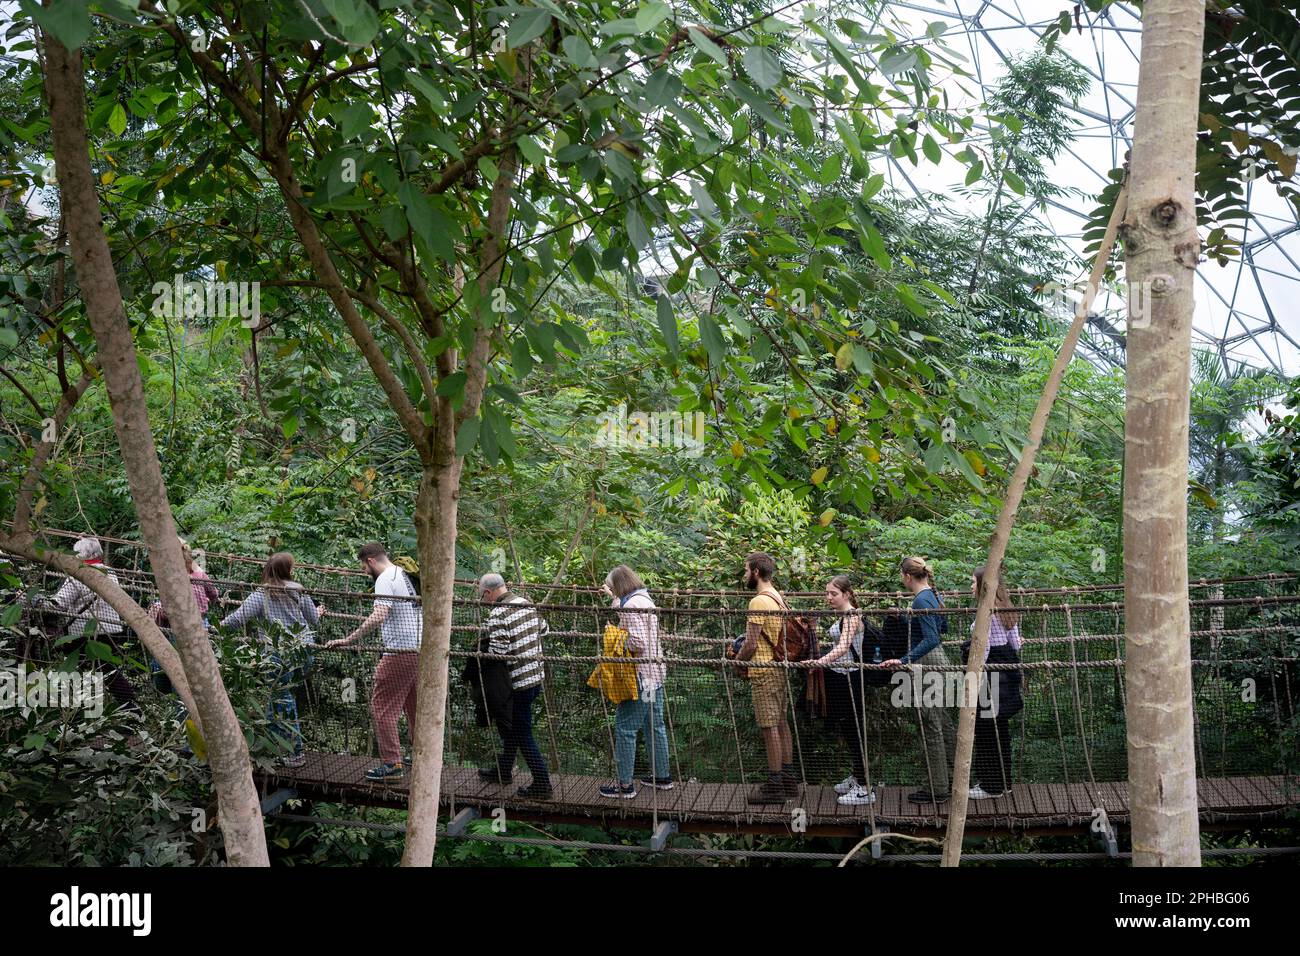 Visitors cross a cable bridge above the Rainforest Biome at the Eden Project, on 22nd March 2023, in St Austell, Cornwall, England. The Rainforest Biome is an indoor rainforest habitat recreation near St Austell in Cornwall. Visitors trek through humid,tropical islands to SE Asia, and West Africa to South America in temperatures raging from 18-35C, surrounded by over 1,000 varieties of tropical plants and vegetation. Stock Photo